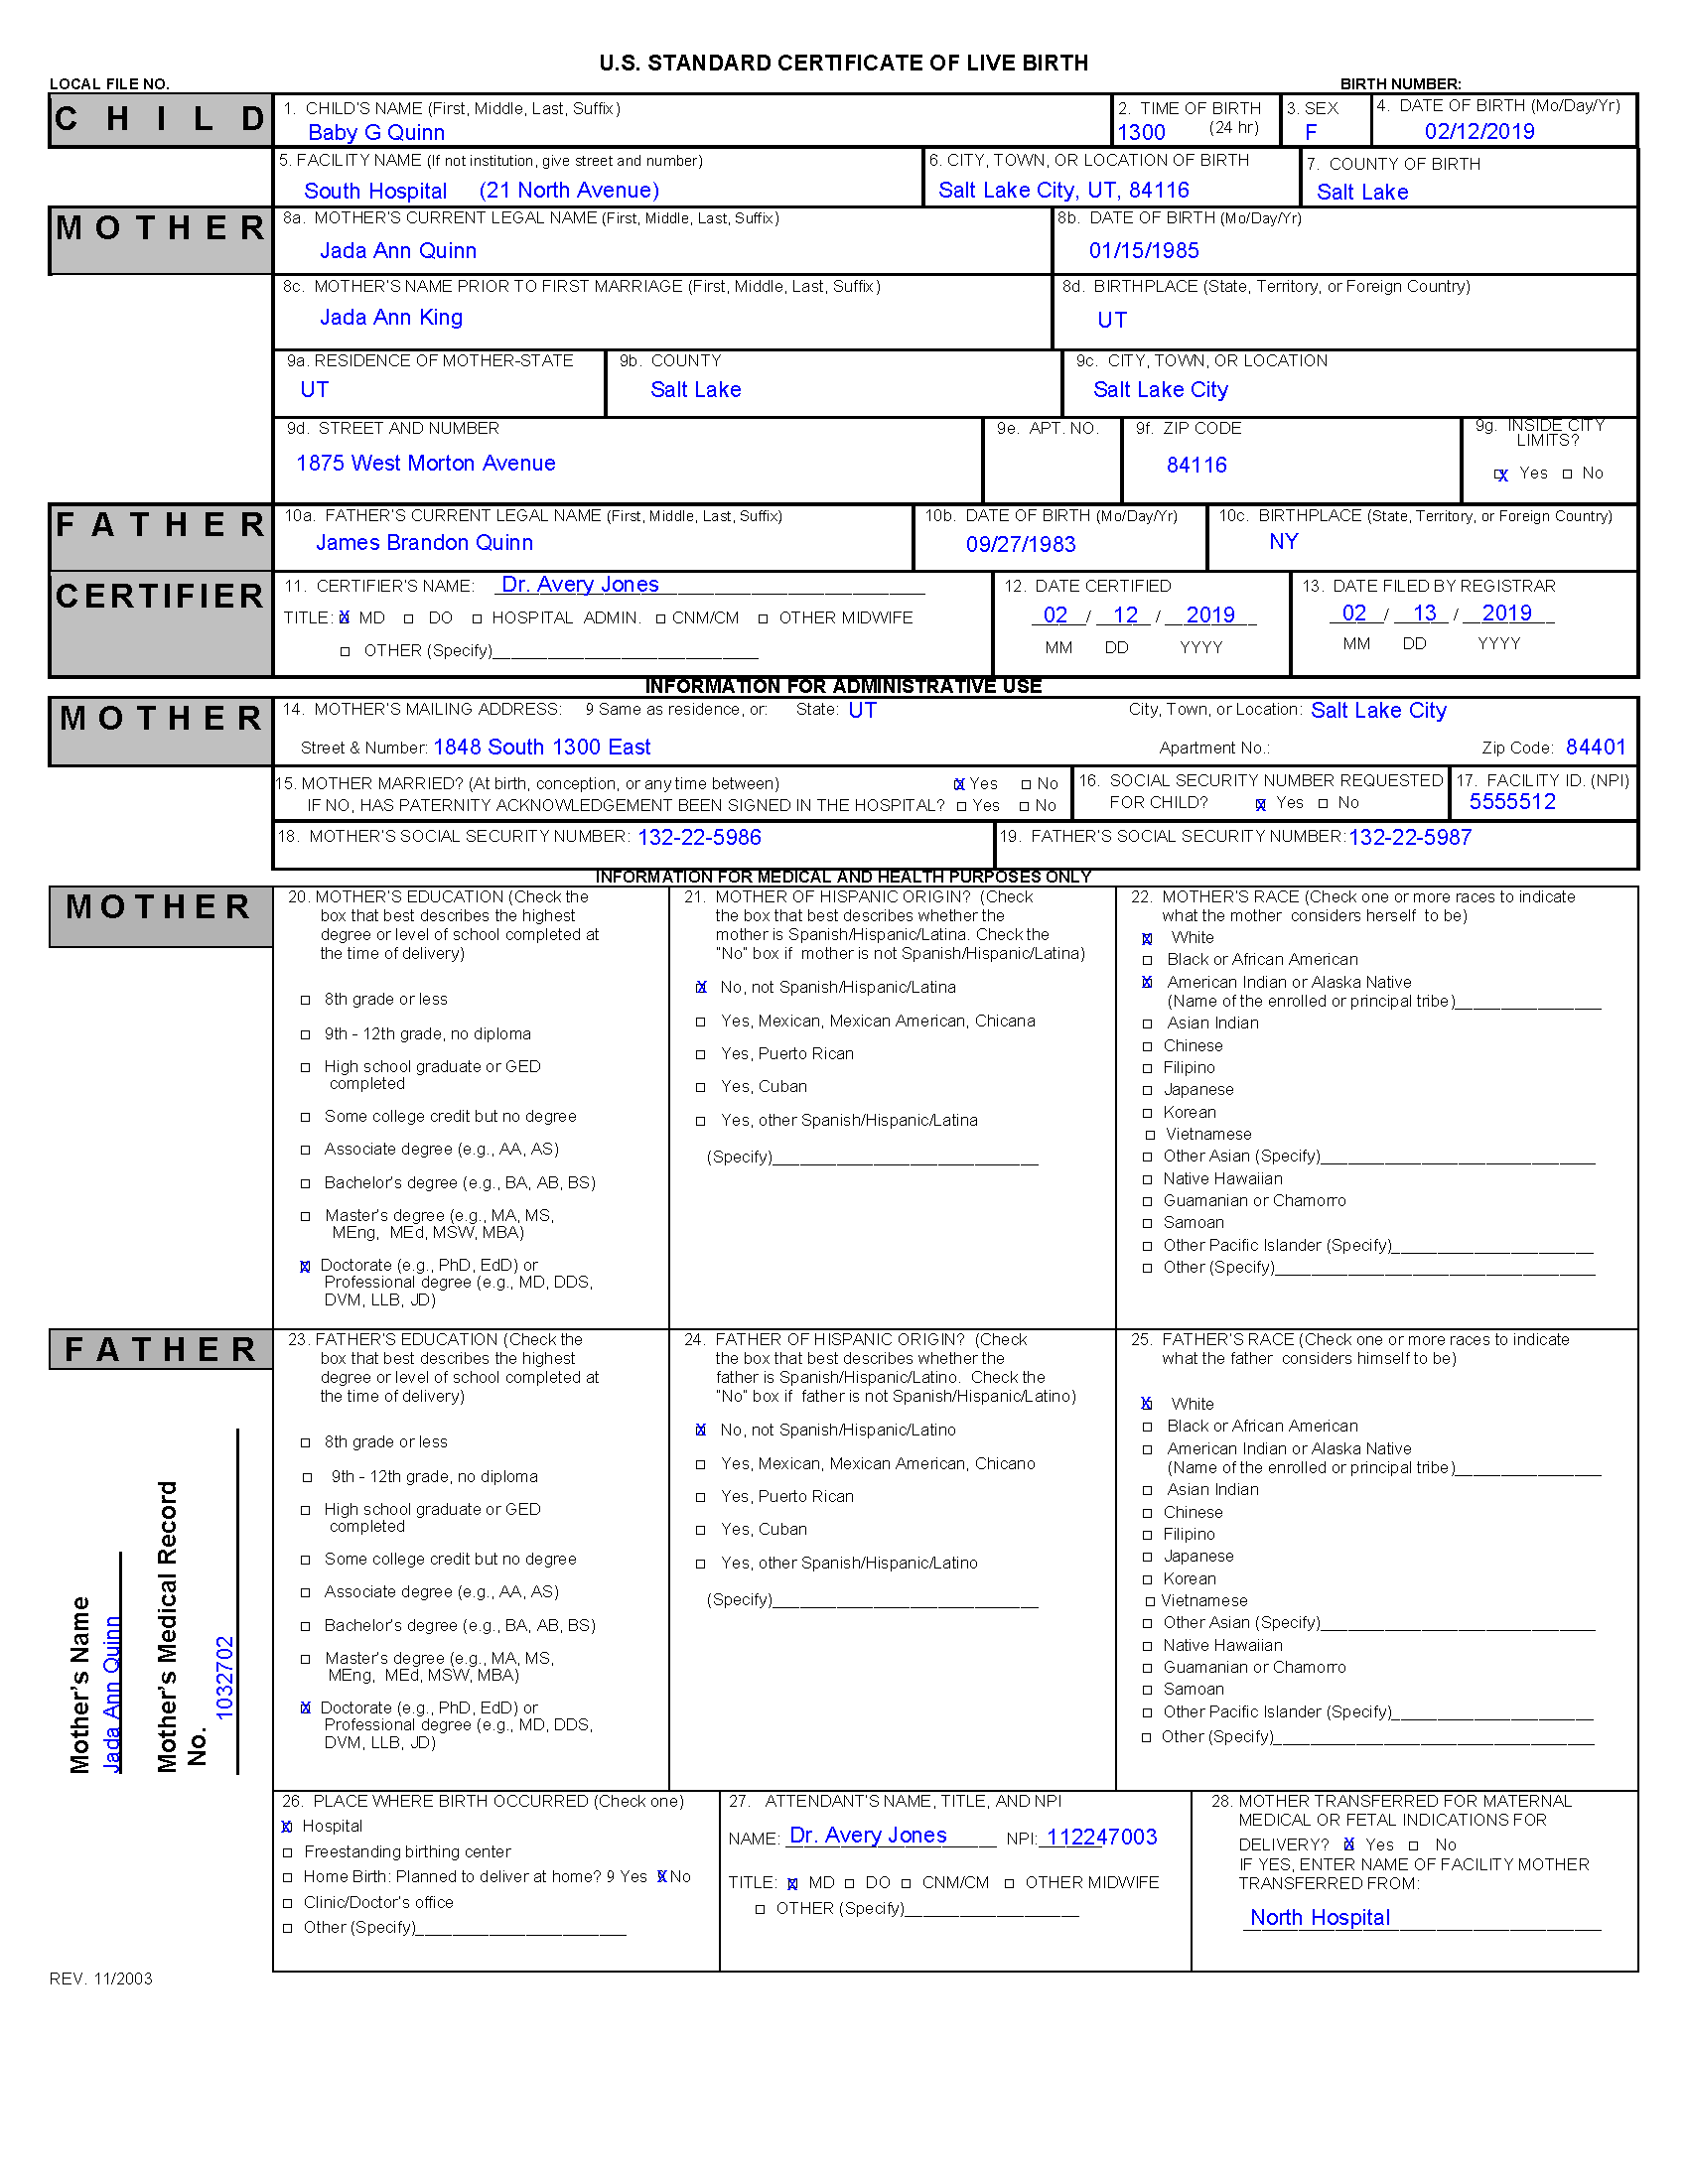 Example Birth Certficate for Baby G Quinn - p1